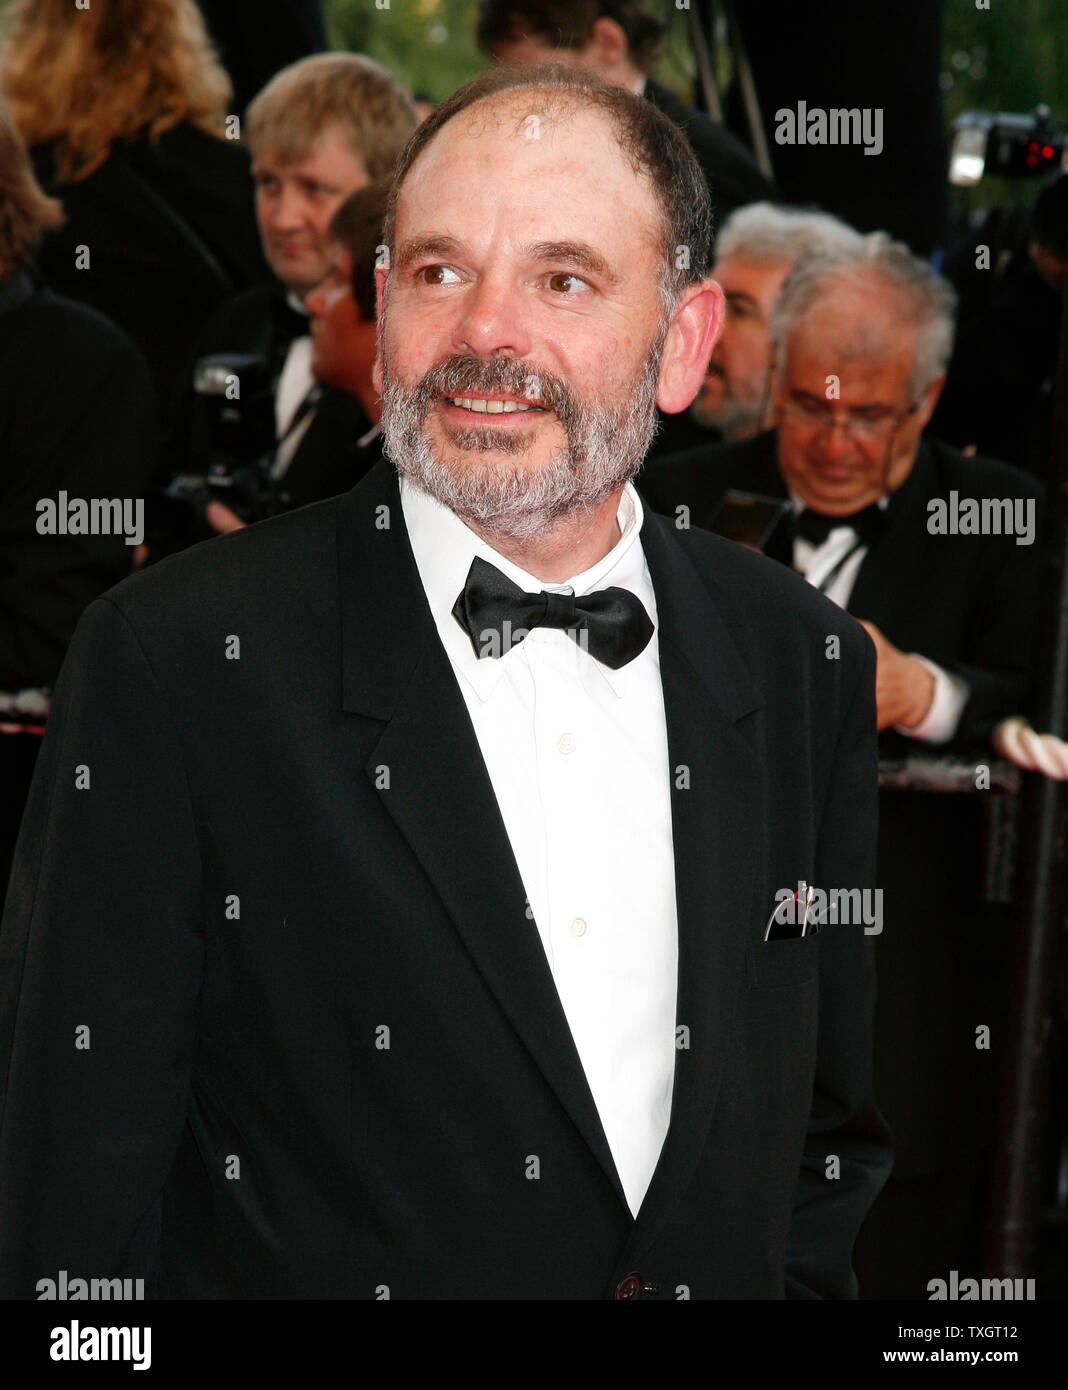 Actor Jean-Pierre Darroussin arrives on the red carpet during the 61st Annual Cannes Film Festival in Cannes, France on May 14, 2008.   (UPI Photo/David Silpa) Stock Photo